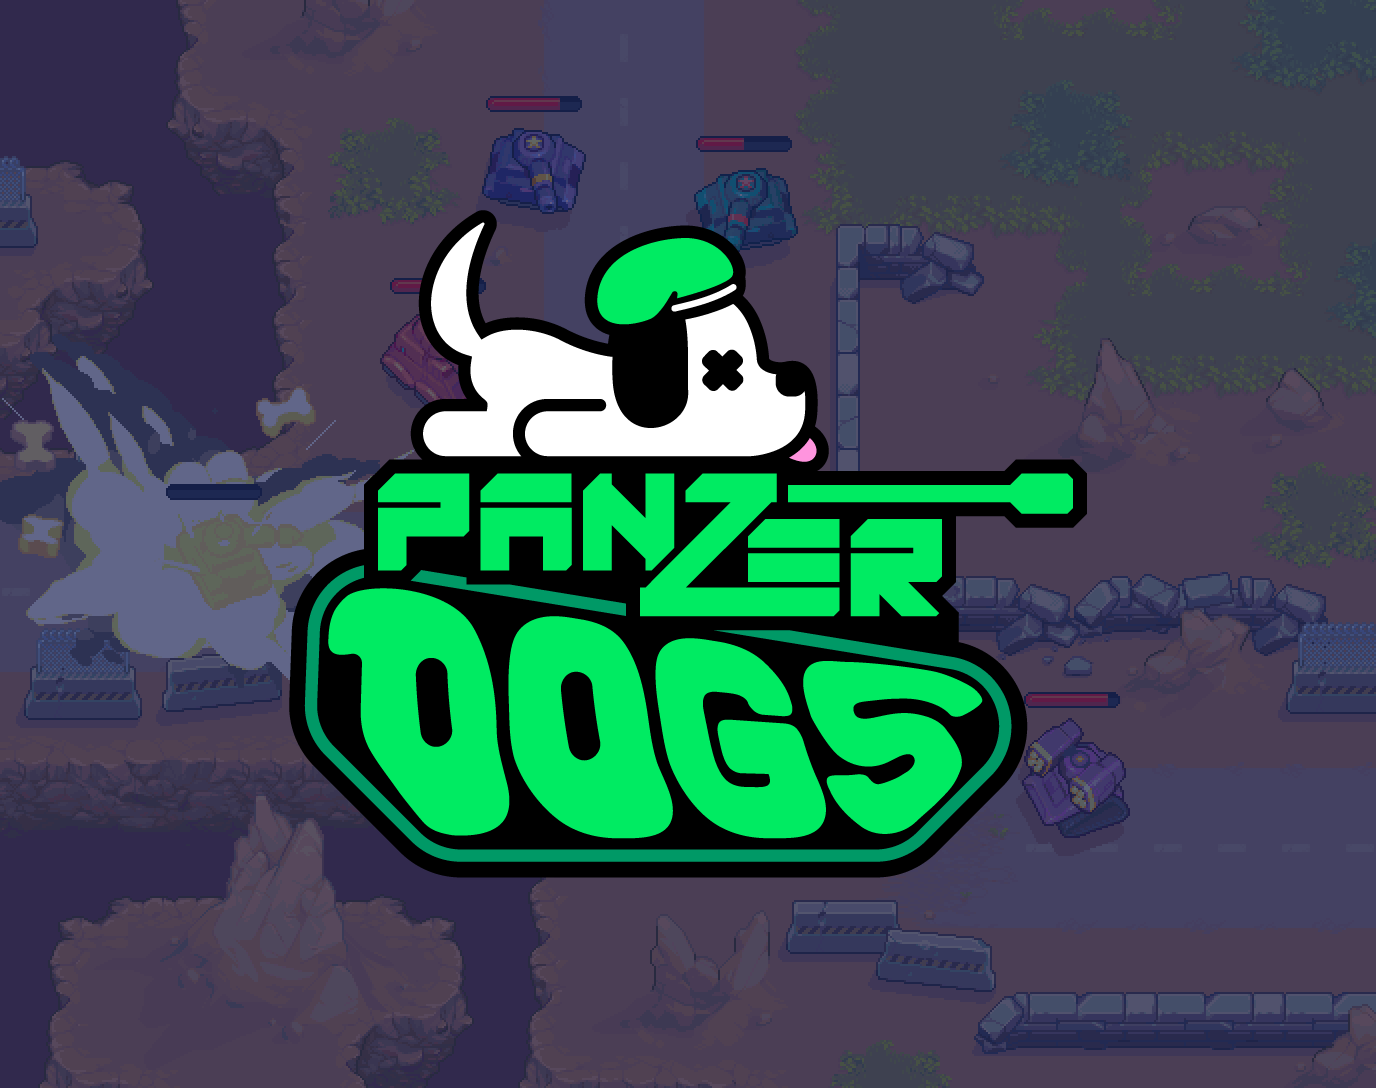 THUNDERDOGS.IO - Play Online for Free!